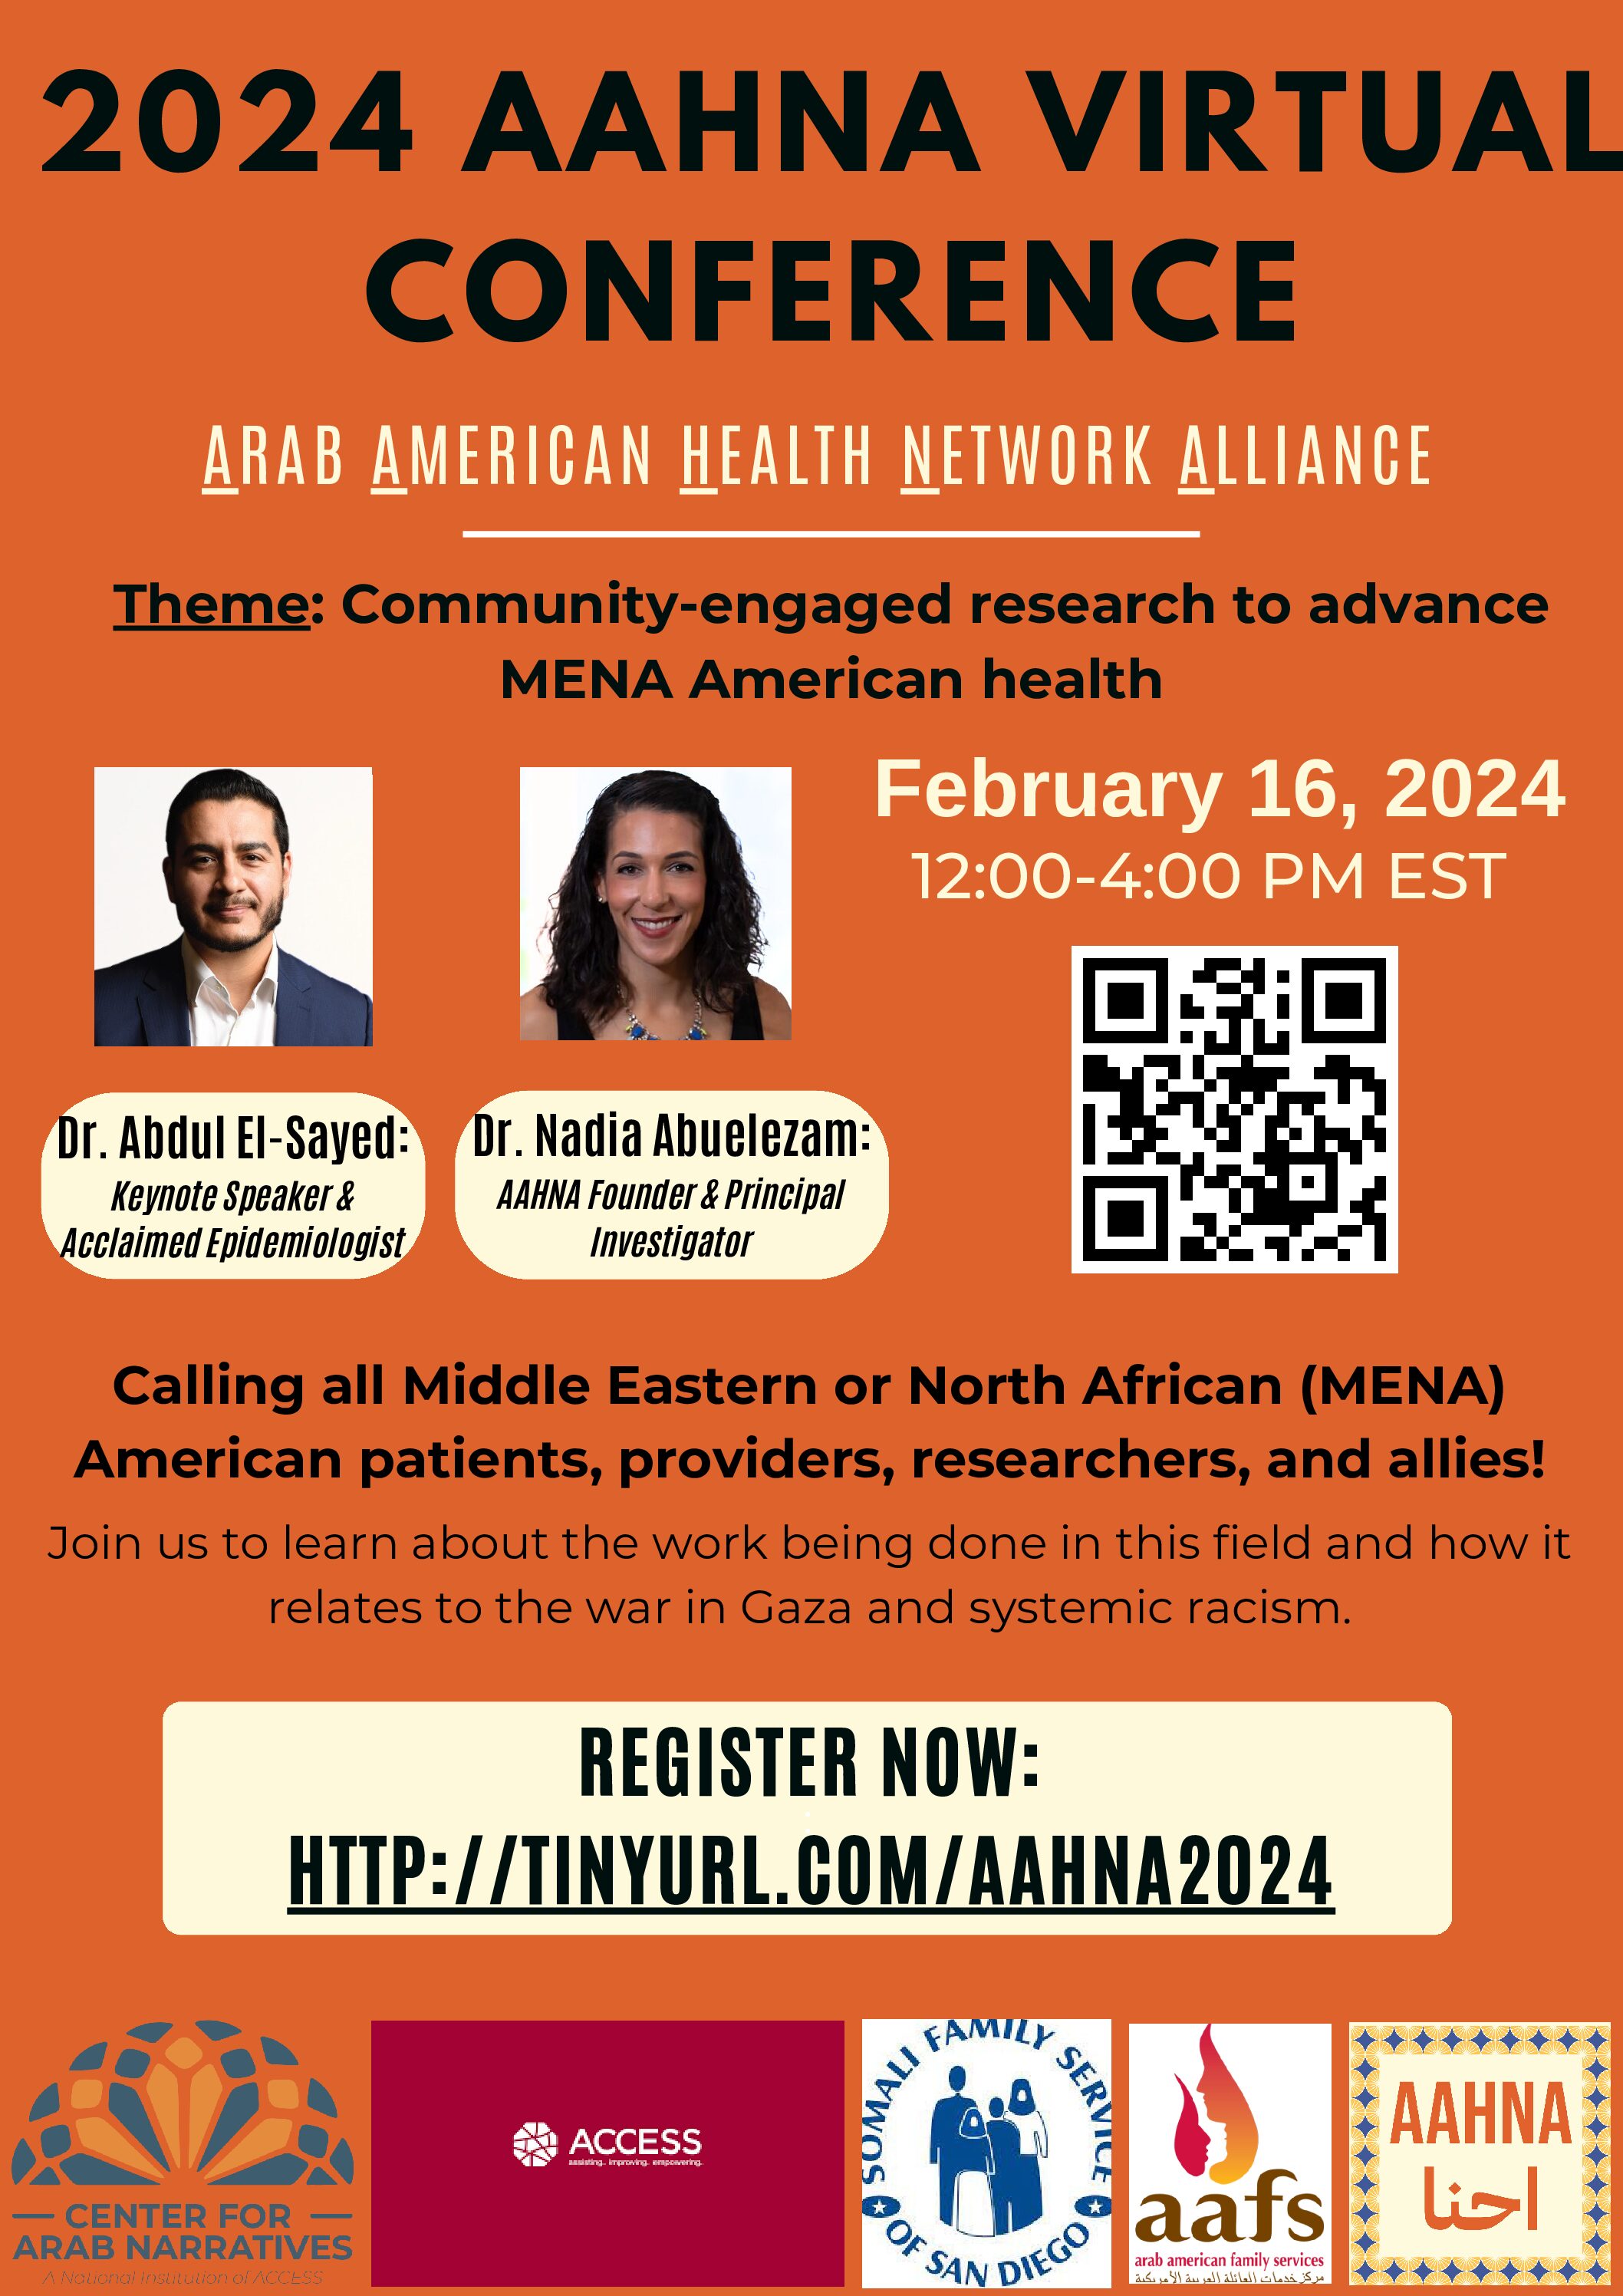 AAHNA Virtual Conference: Advancing Arab American Network Alliance!